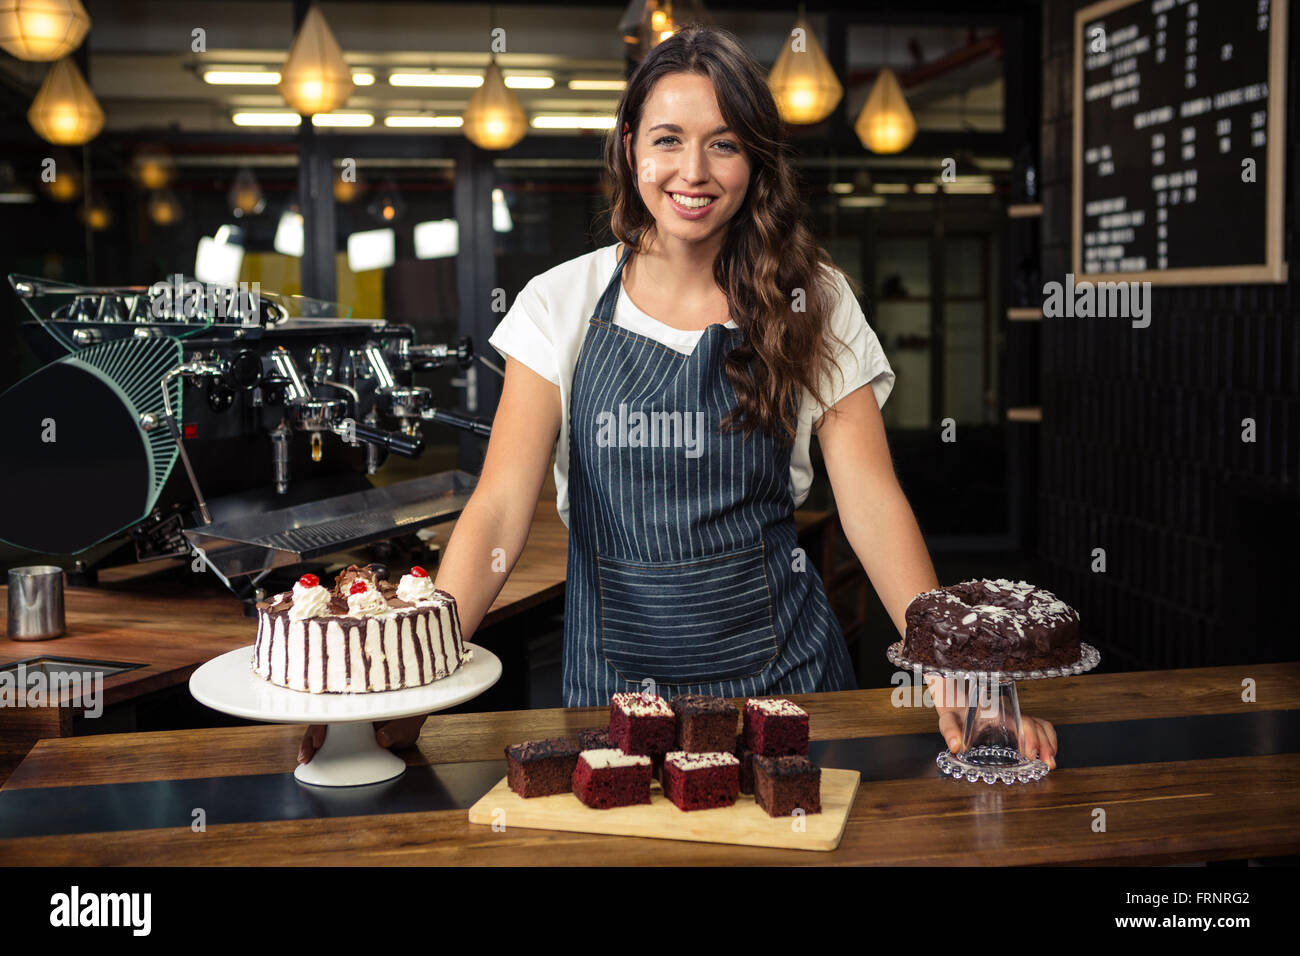 Smiling barista presenting plate with cakes Stock Photo